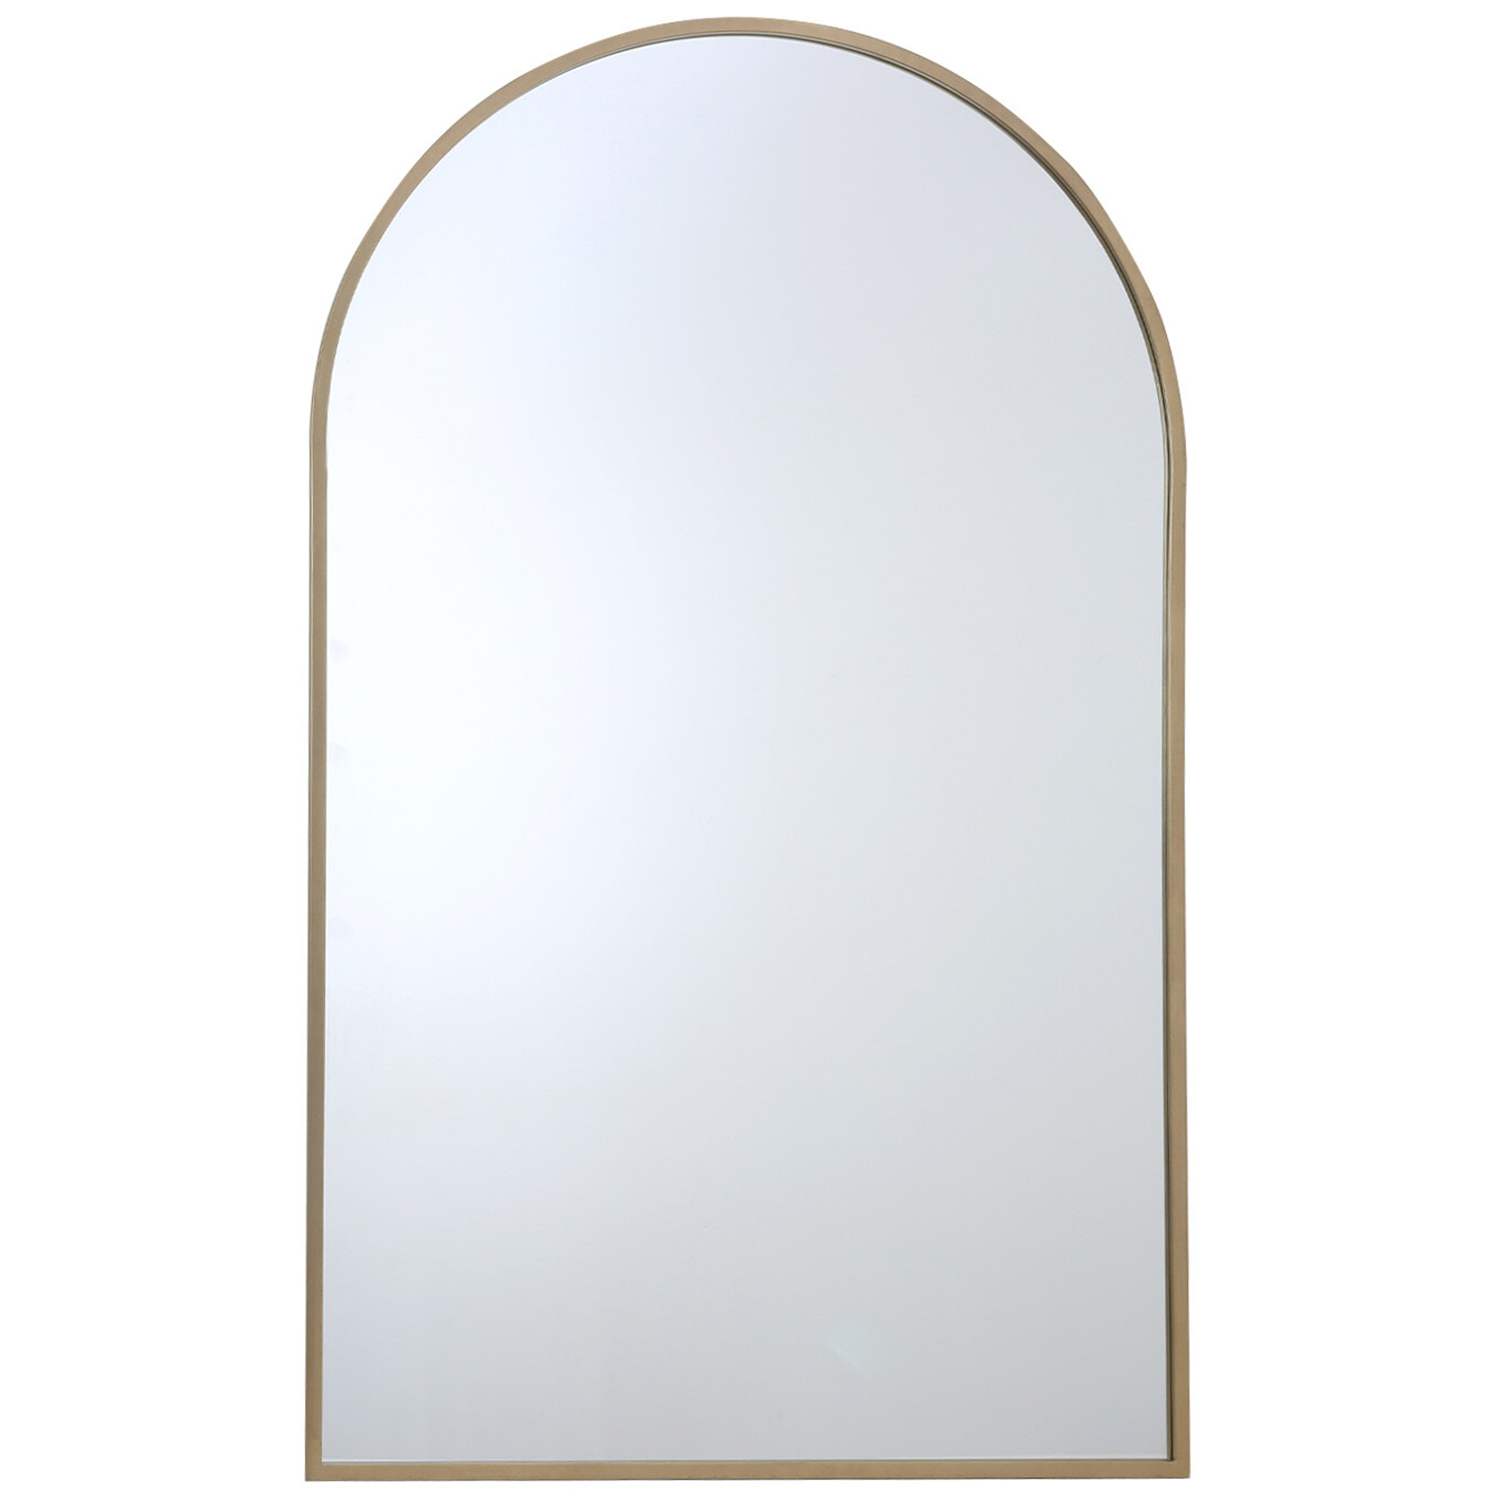 Gold Wide Metal Arch Mirror 180 x 110cm Image 1